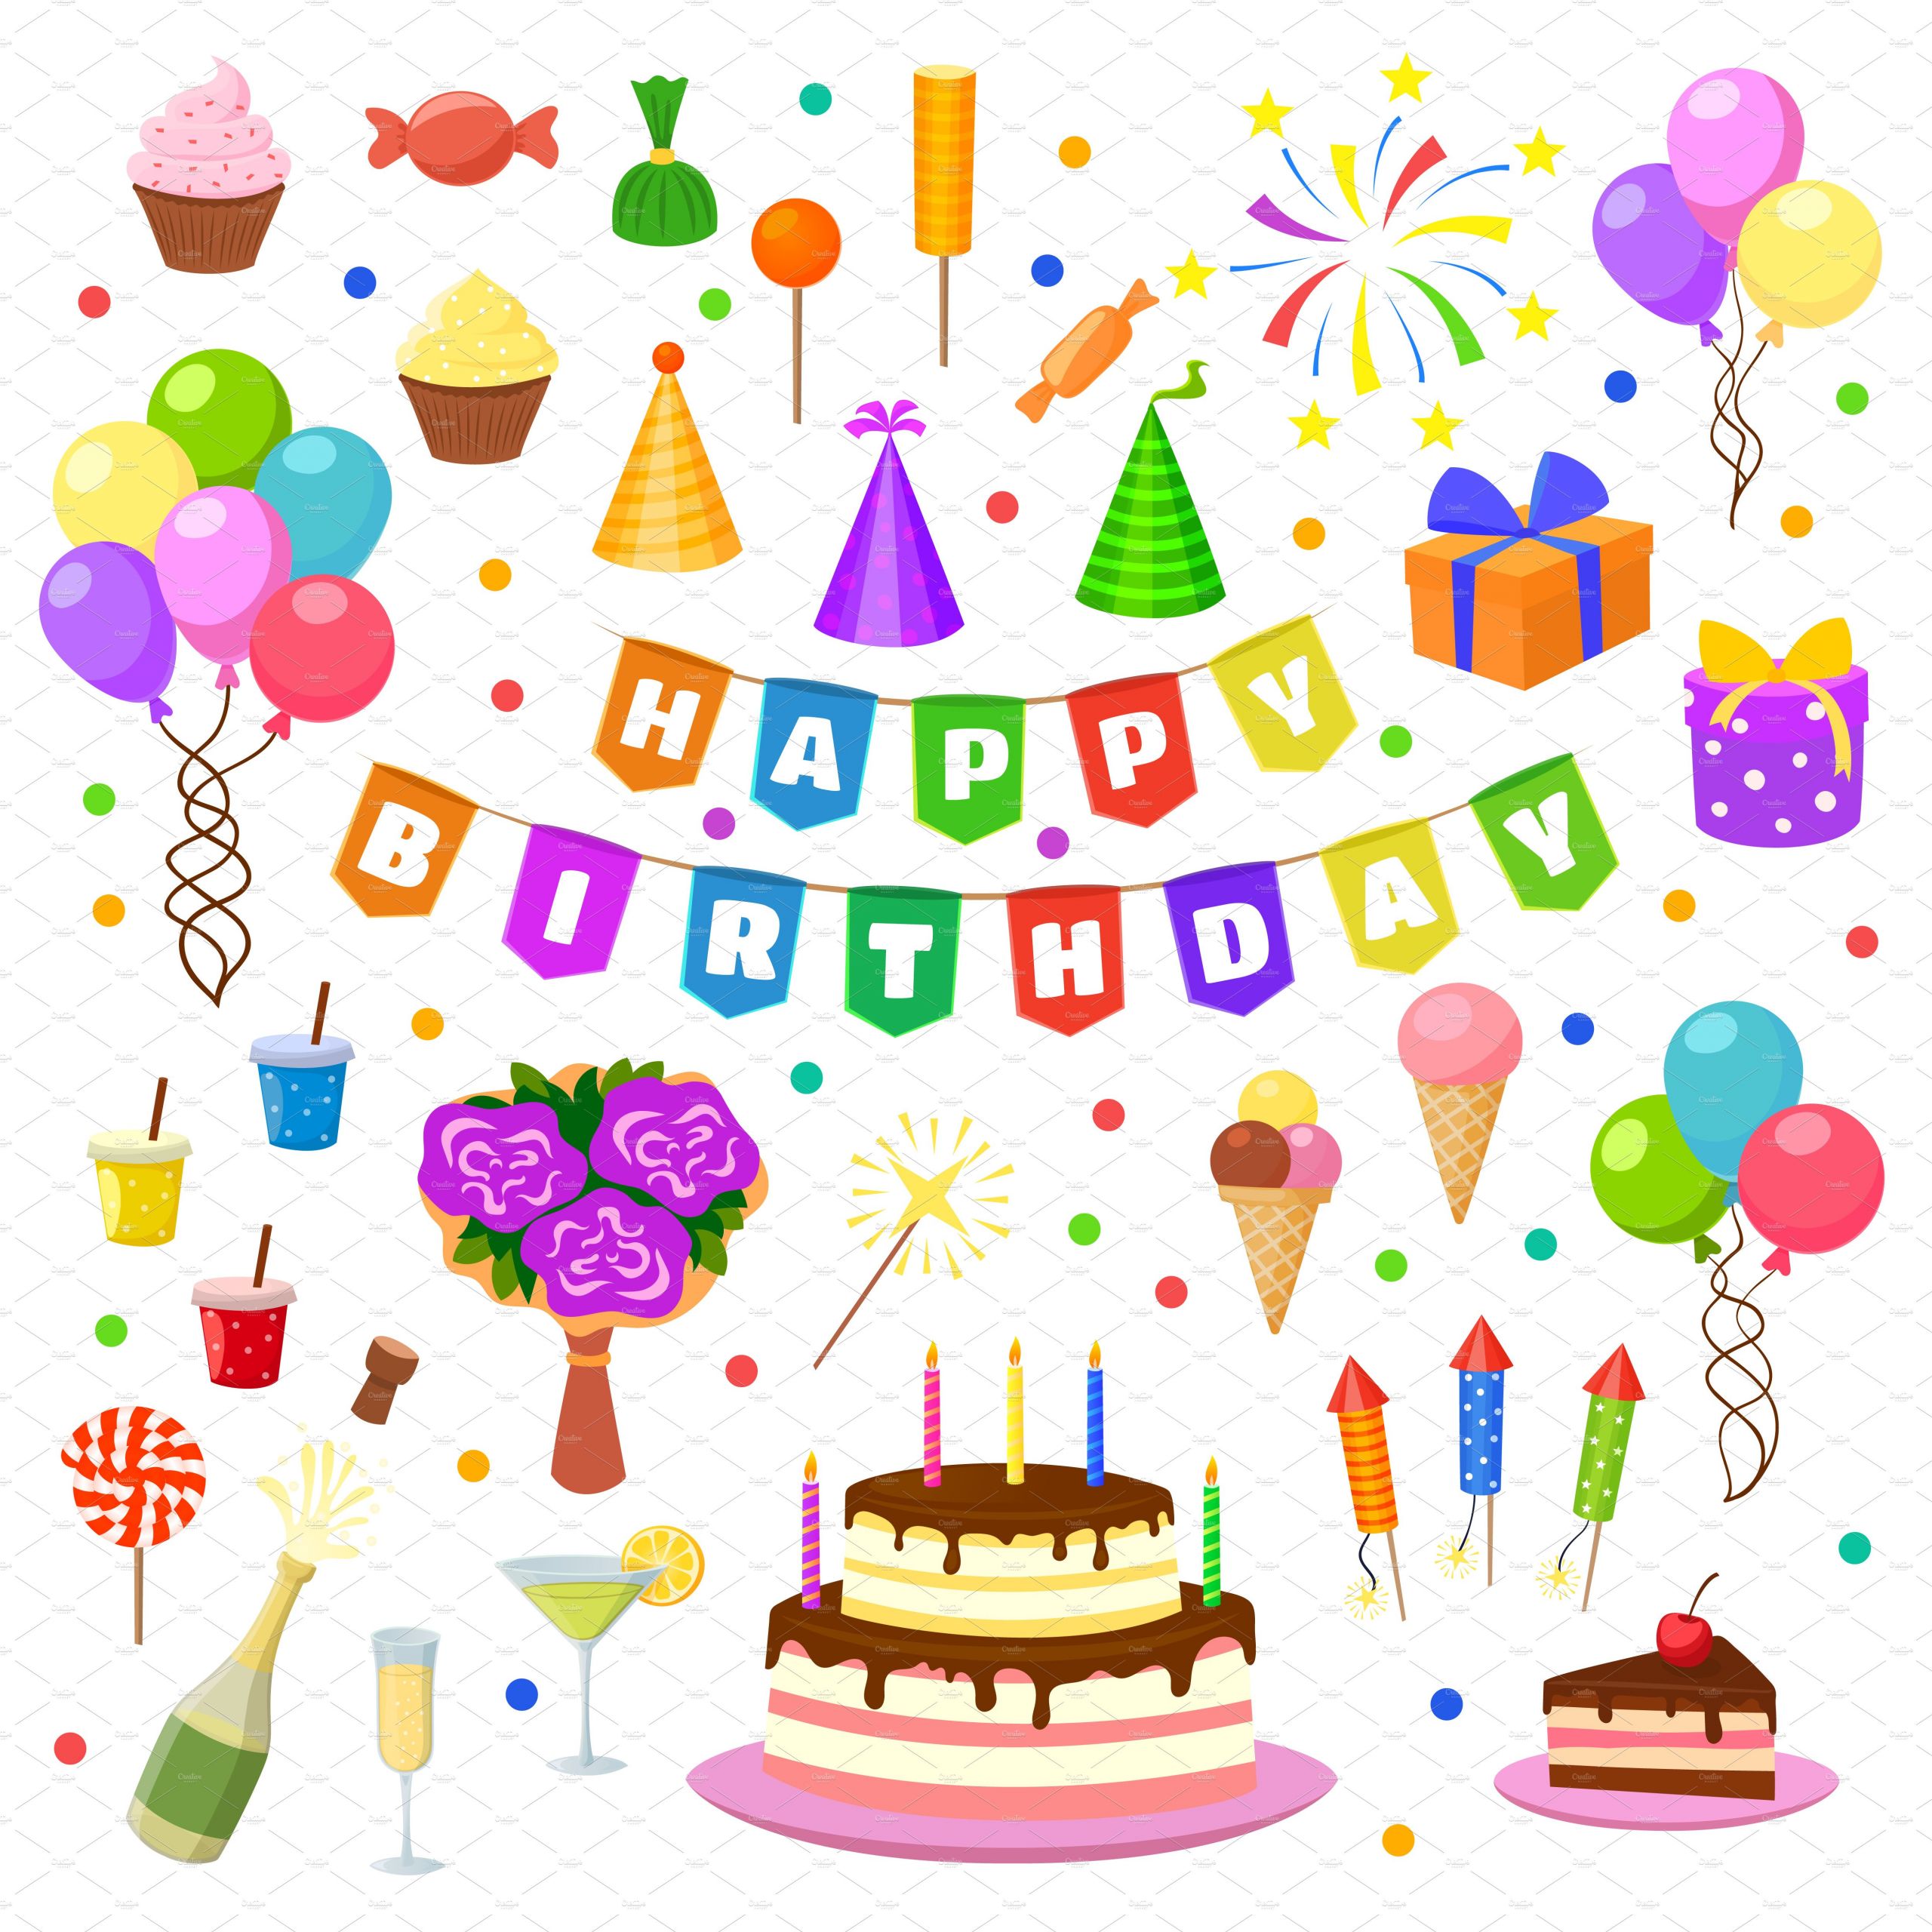 Happy Birthday Party
 Happy birthday party symbols vector Graphic Objects